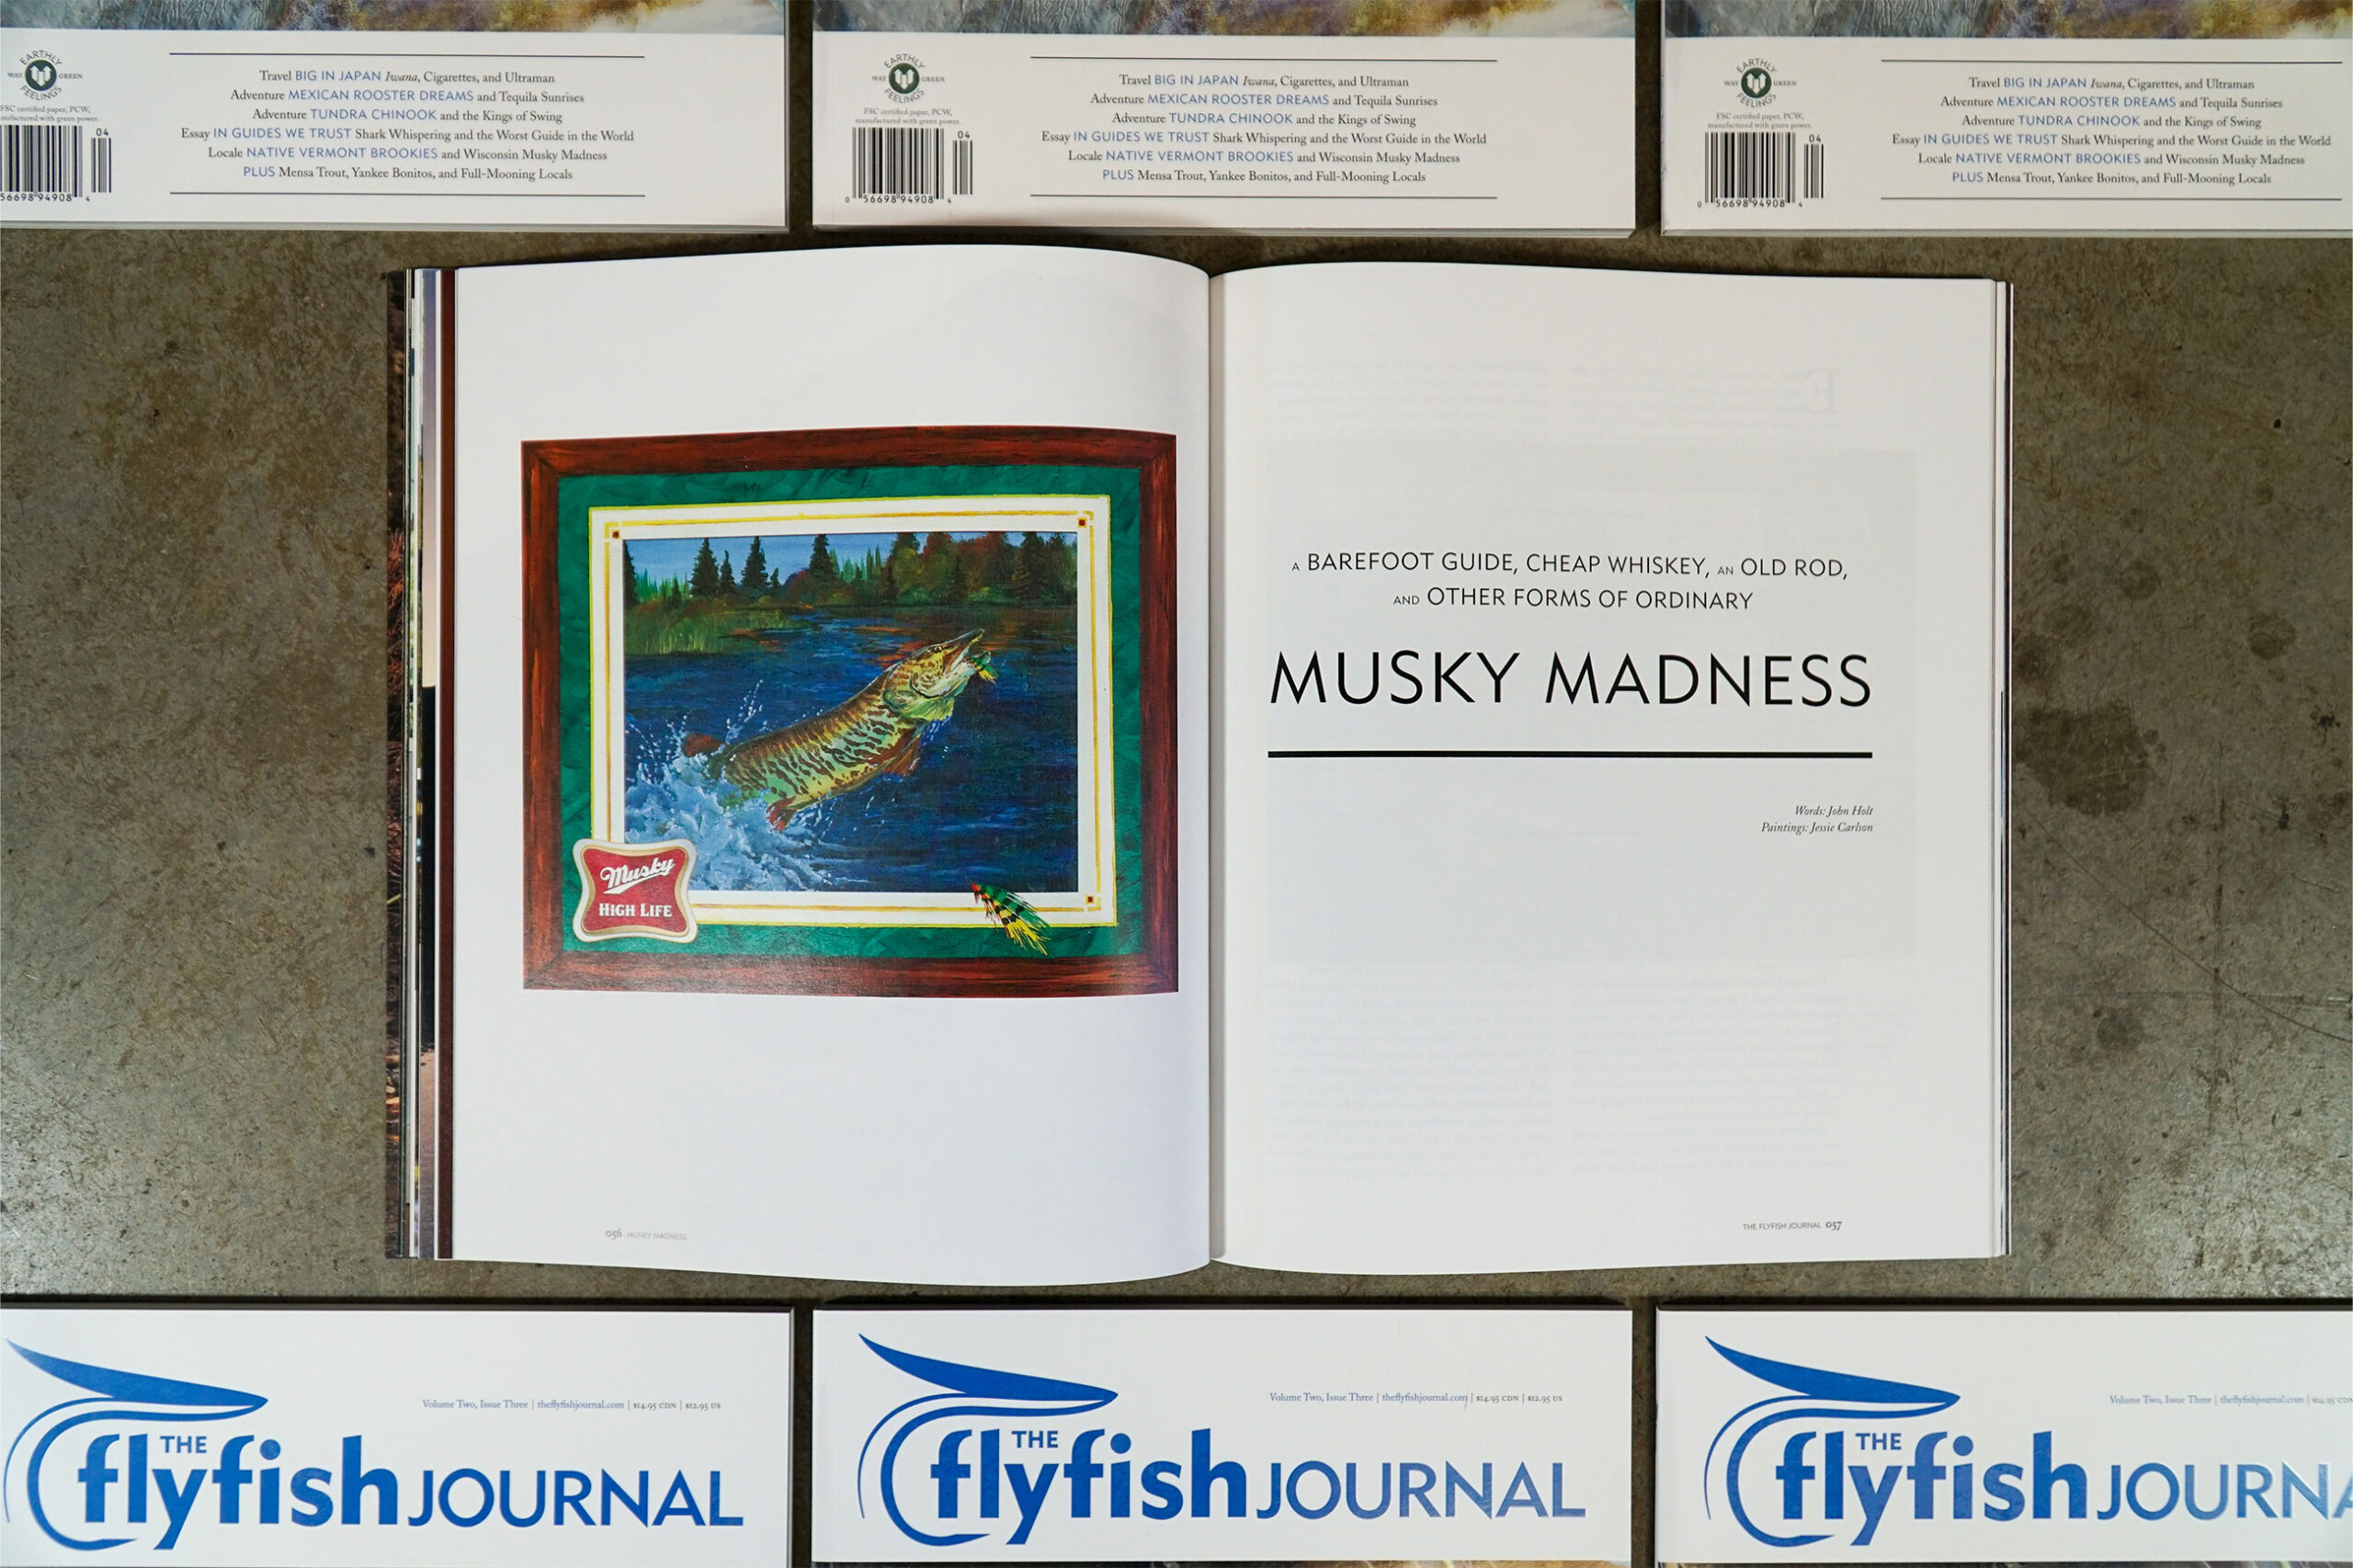 The Flyfish Journal Volume 2 Issue 3 Feature Musky Madness